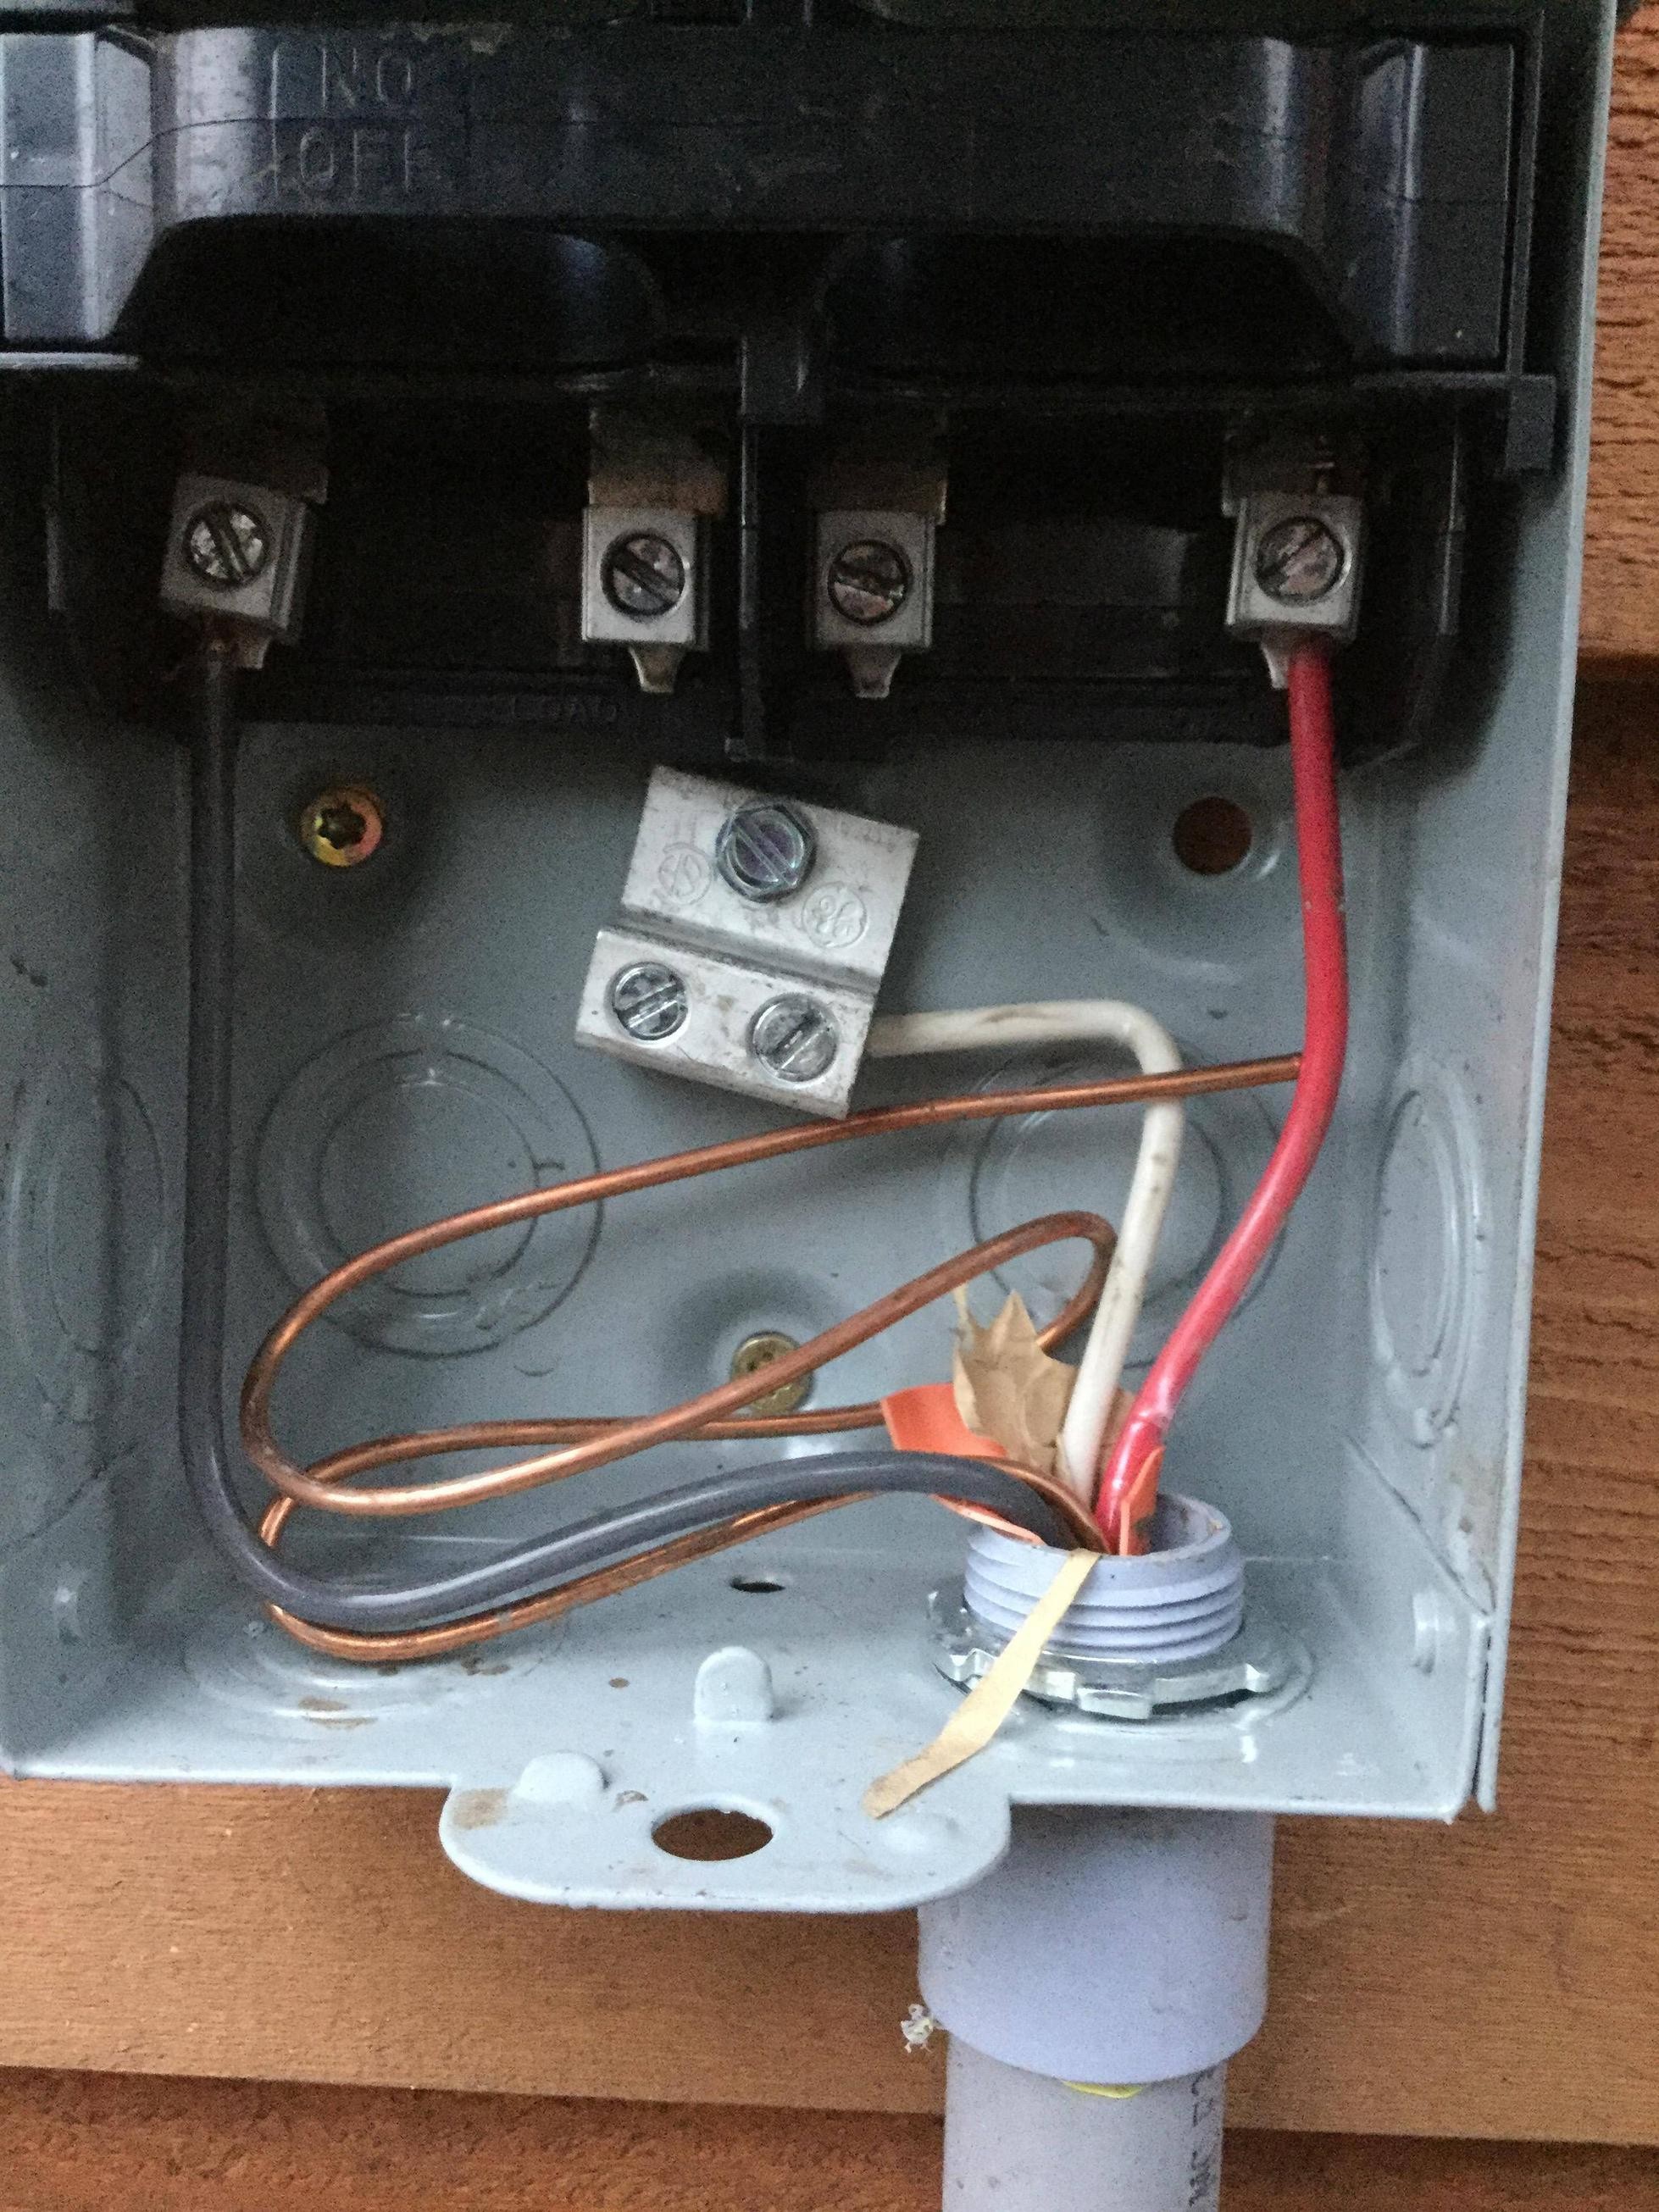 Wiring A 60 Amp Disconnect with A Gfi if My Heat Pump Does Not Have A Neutral Do I Still Need A Of Wiring A 60 Amp Disconnect with A Gfi